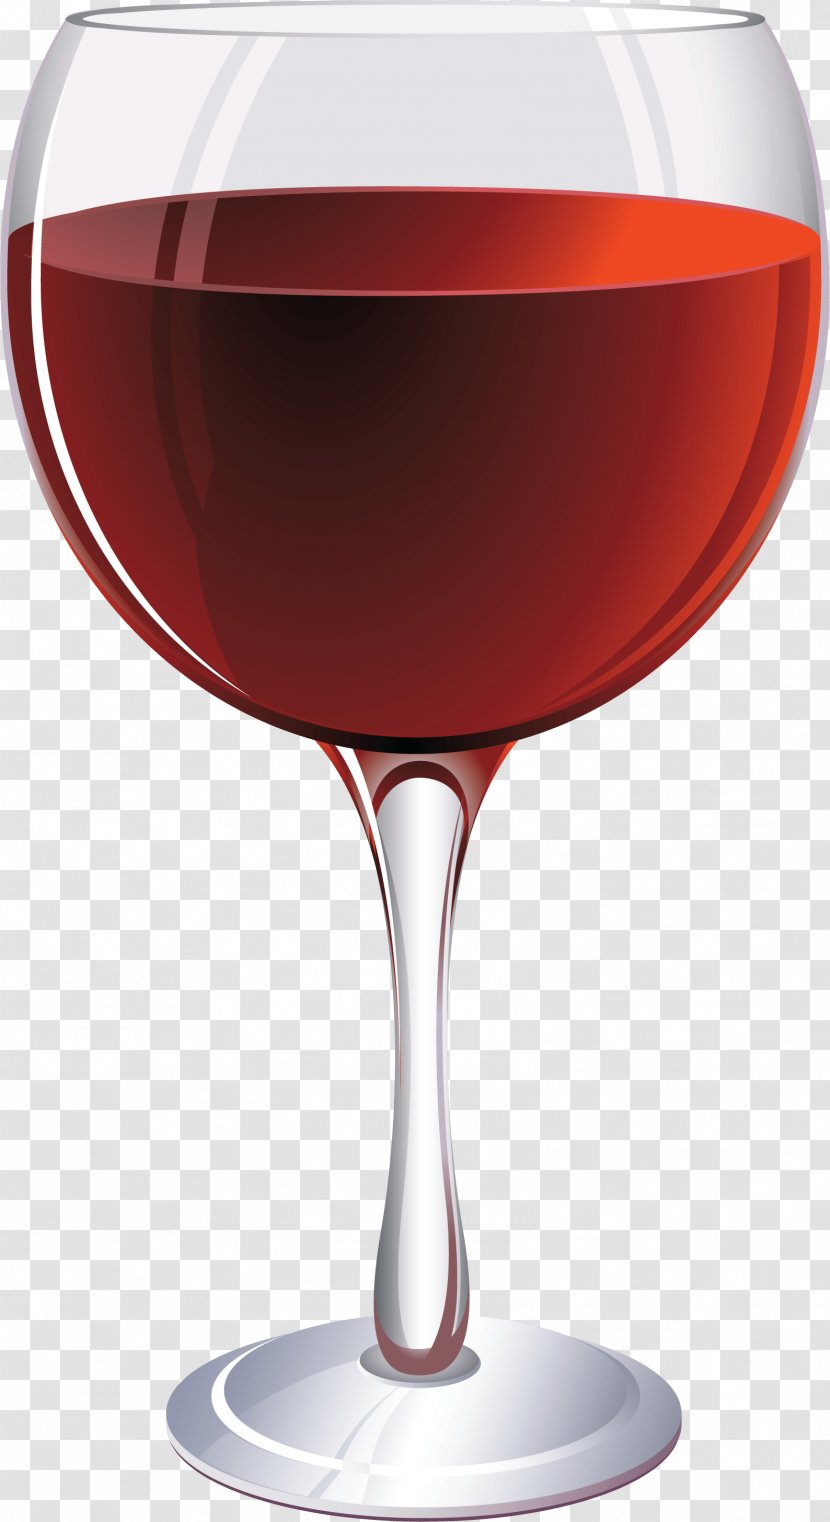 Red Wine Champagne Cocktail Glass - White - Image Transparent PNG